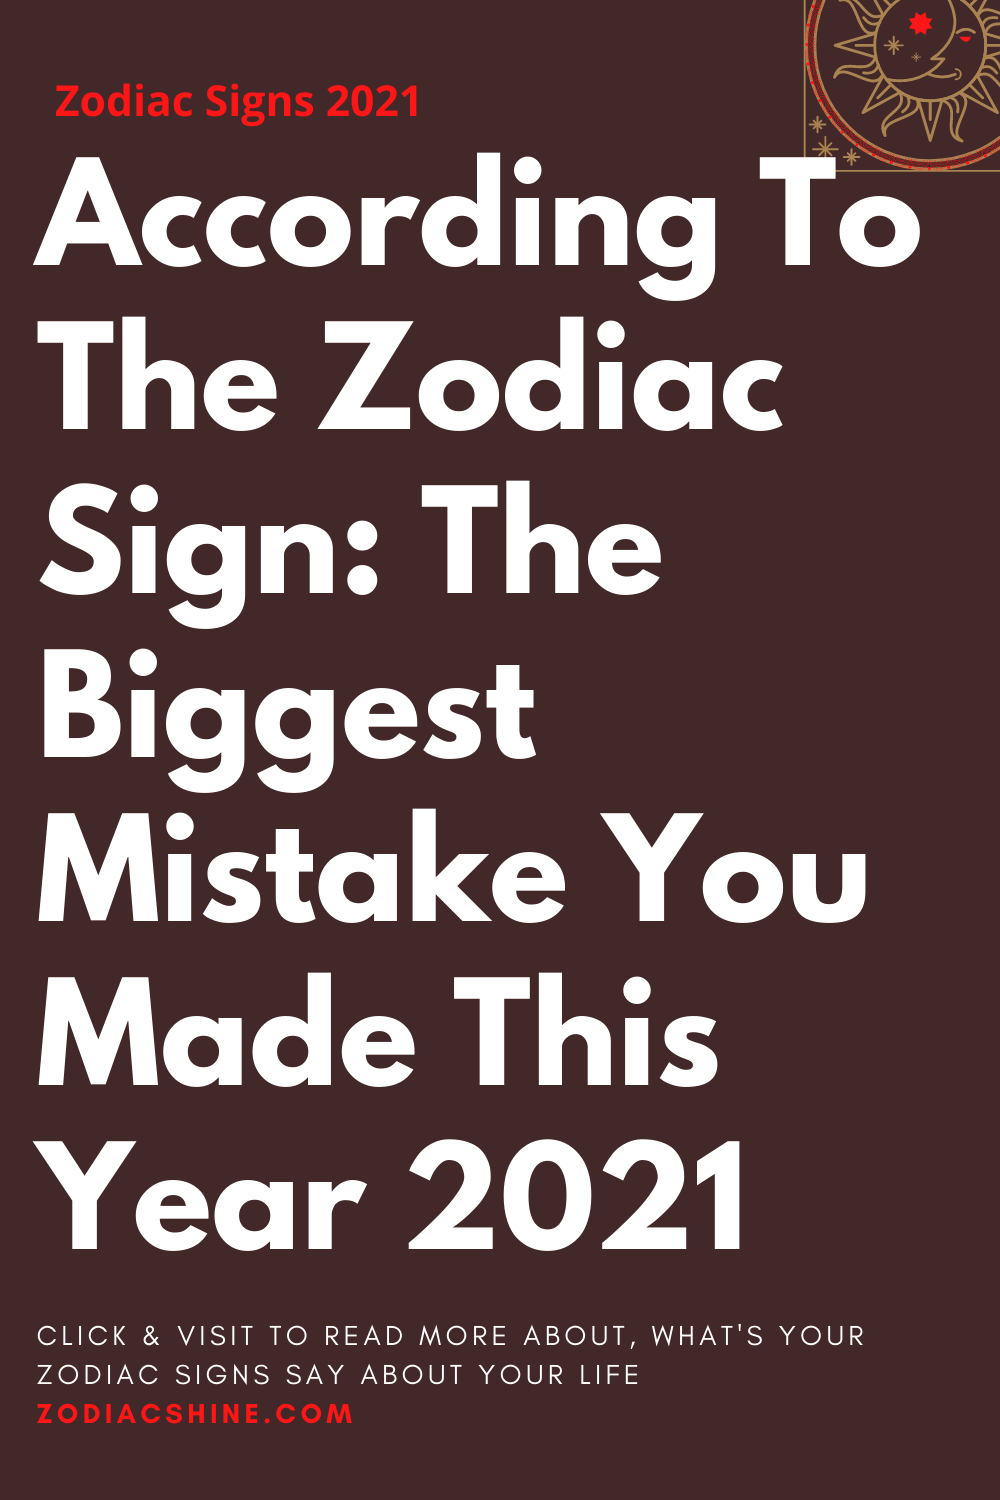 According To The Zodiac Sign: The Biggest Mistake You Made This Year 2021